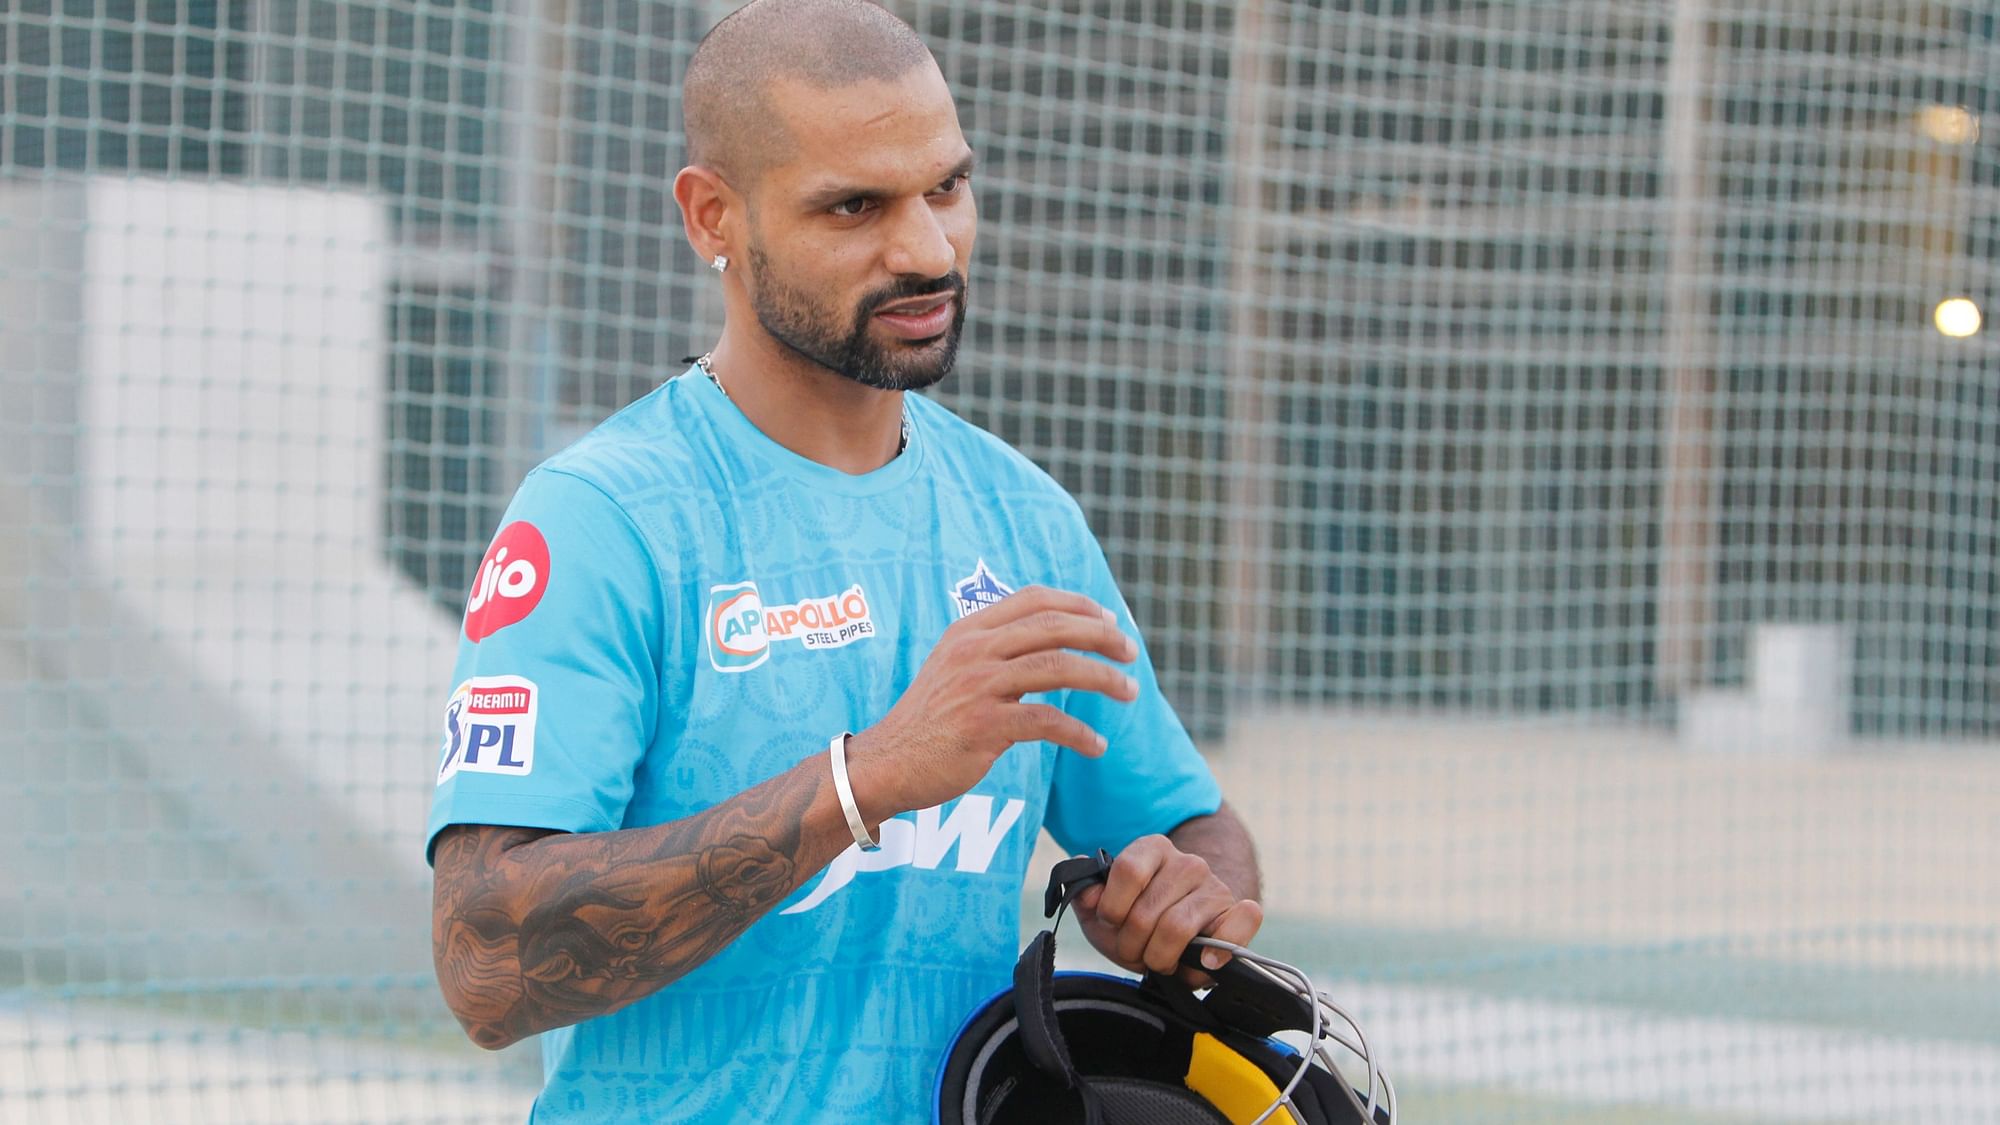 Shikhar Dhawan had missed out on a chance to equal Raina’s record of 38 fifties.